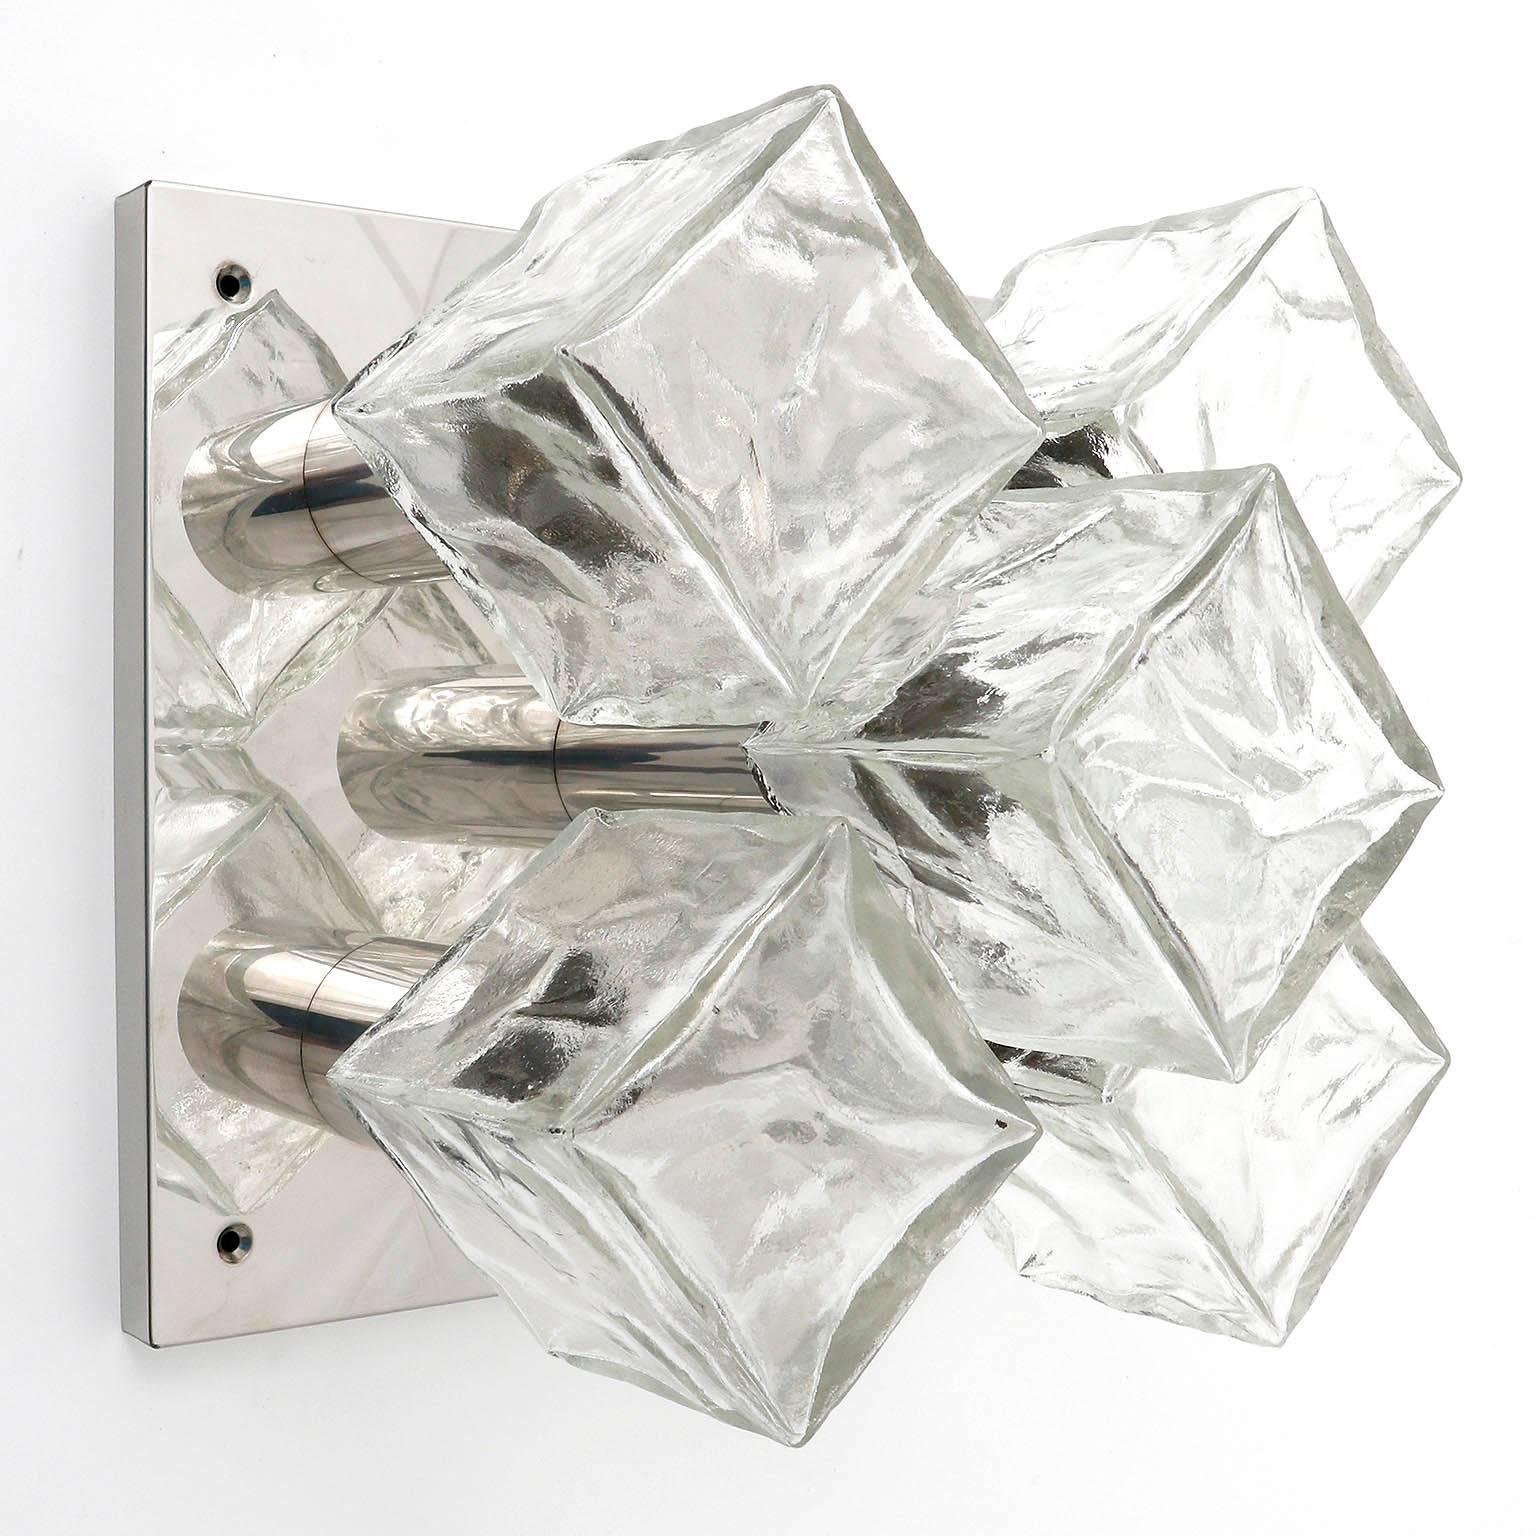 One of four modulare and square light fixtures model 'Cubus' (German 'Würfel') by Kalmar, Austria, manufactured in Mid-Century, circa 1970 (late 1960s or early 1970s).
They are made of polished chrome and frosted cubic glasses. Each fixture has five